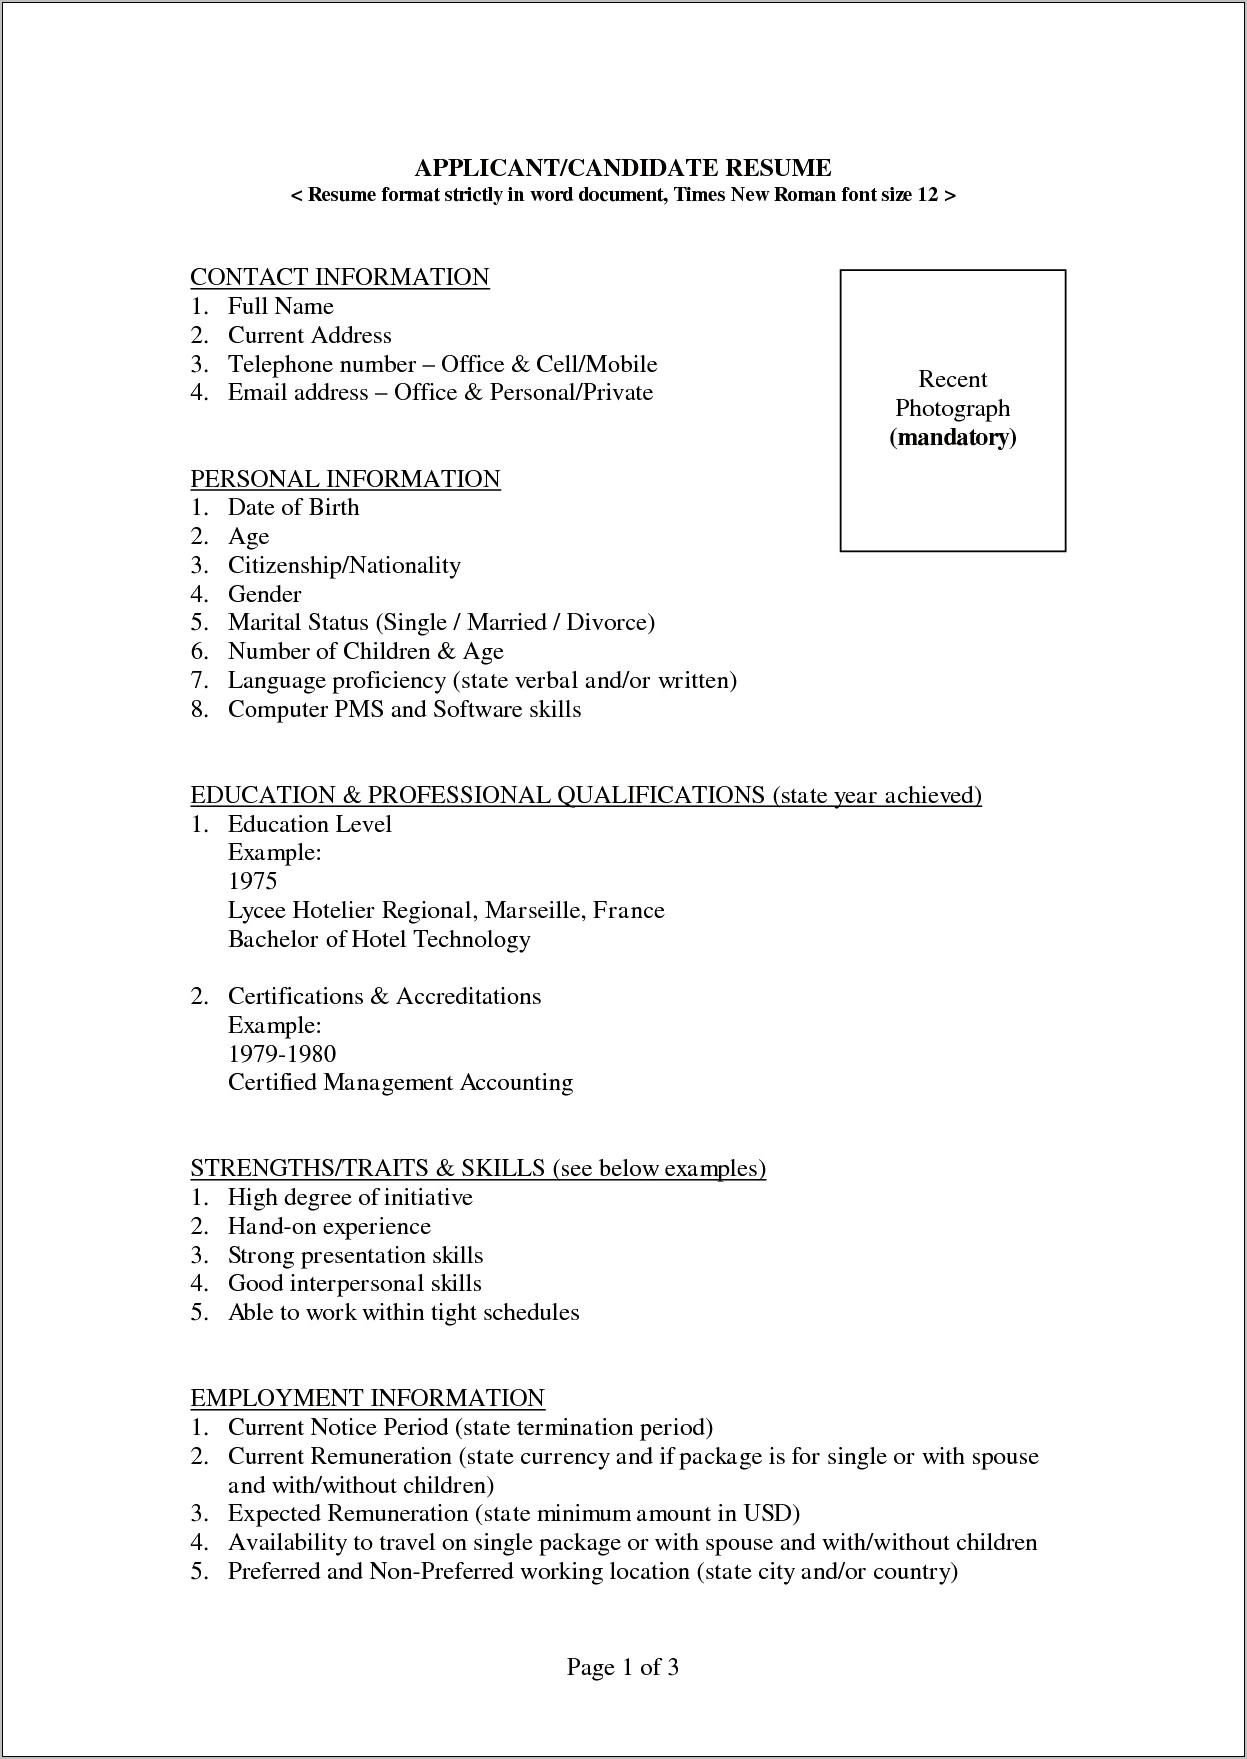 Microsoft Office Resume Templates 2007 Downloads